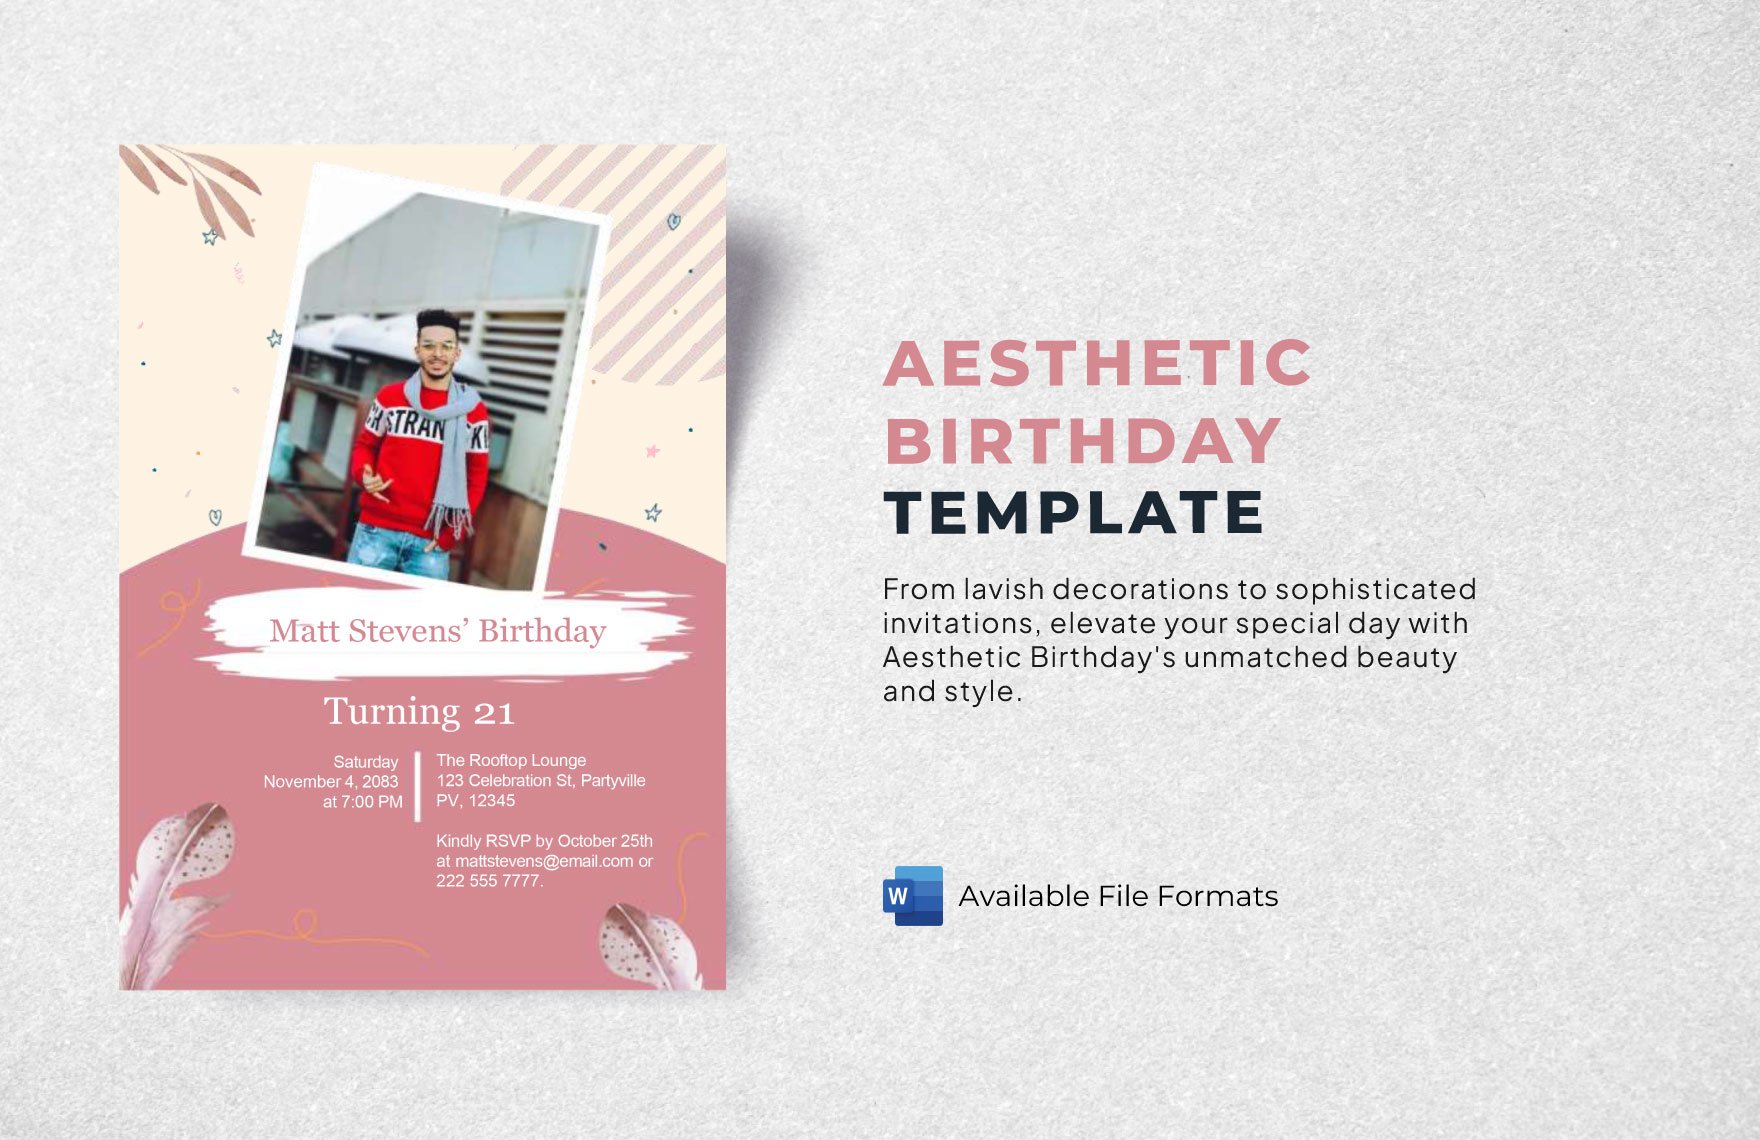 Free Aesthetic Birthday Template in Word